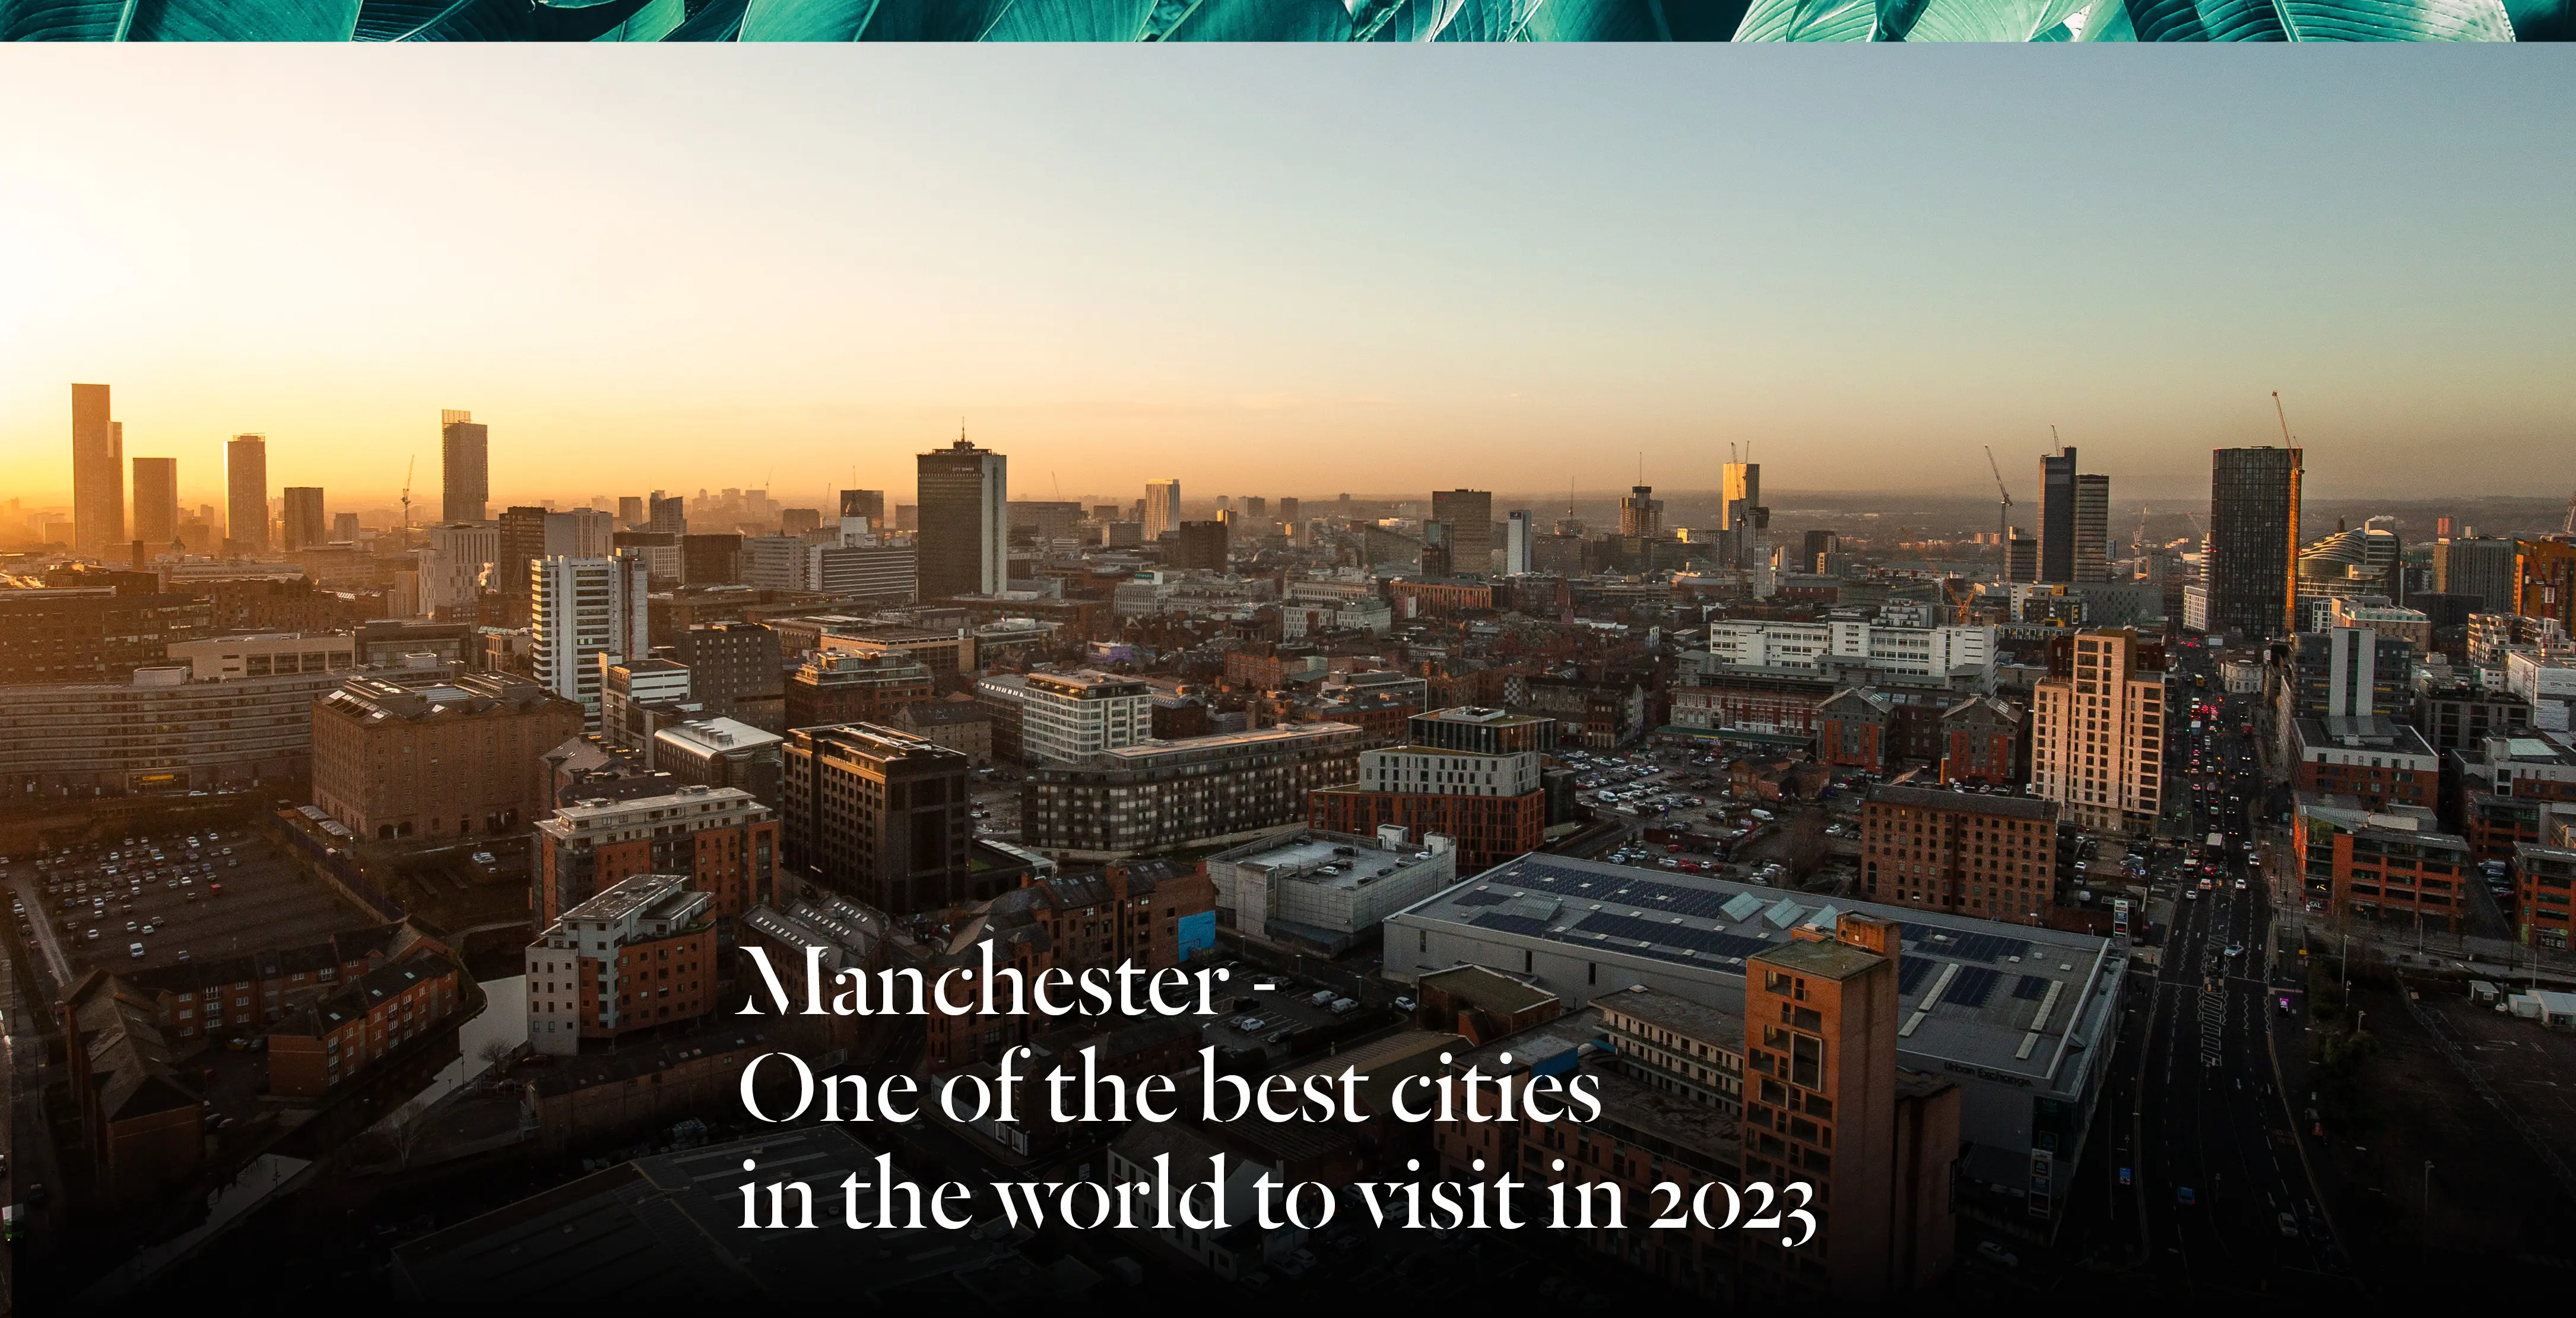 Manchester has been named a 'must-see' destination